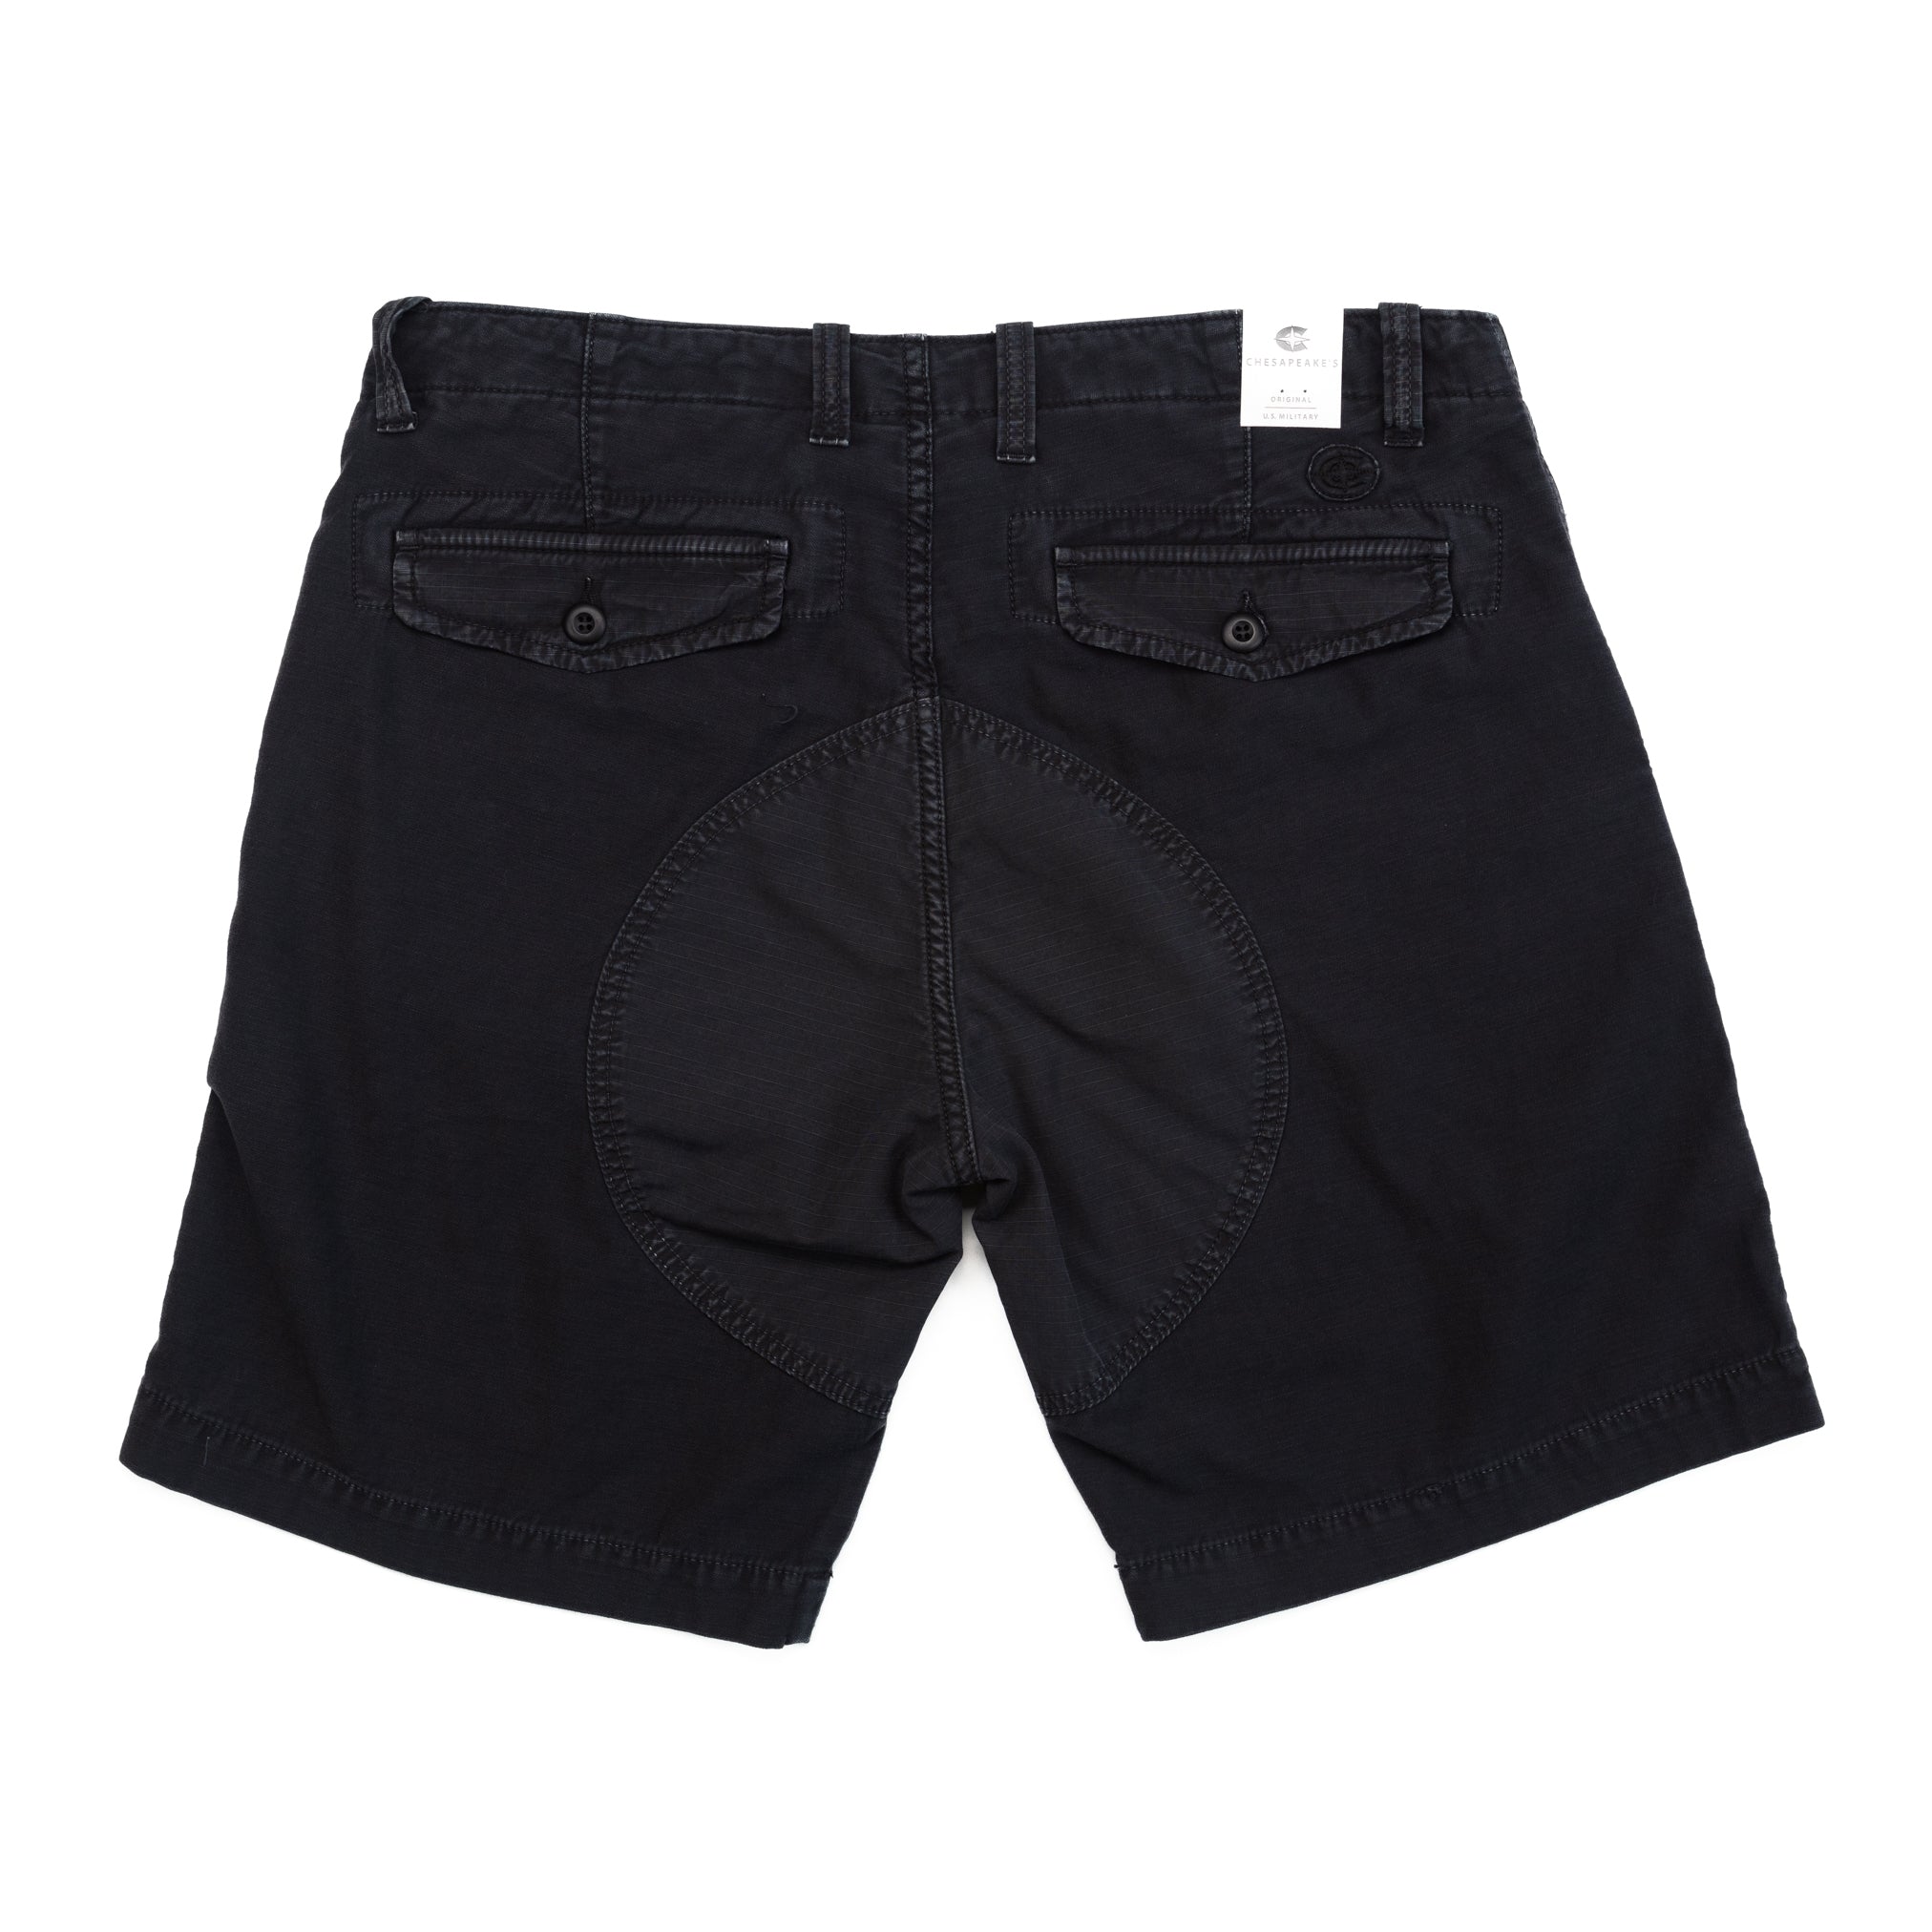 Harbour Deck Shorts in Faded Black